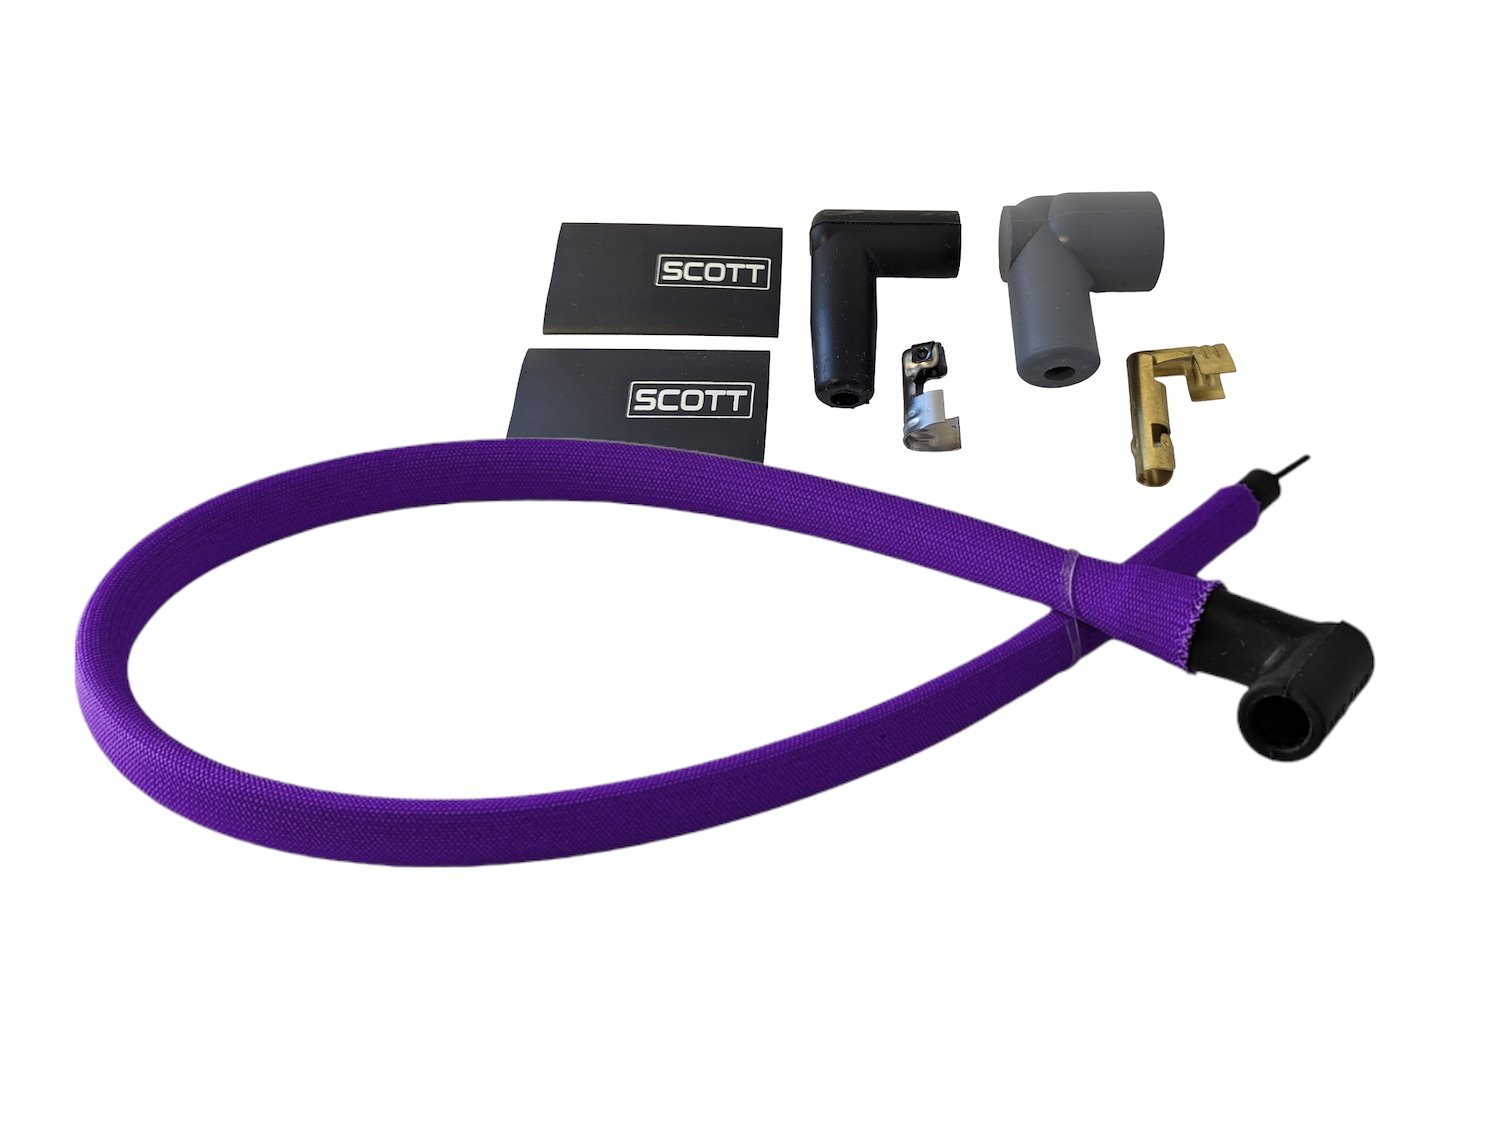 SPW300-PSCW36-7 36 in. Super Mag Fiberglass-Oversleeved Coil Wire Kit [Purple]